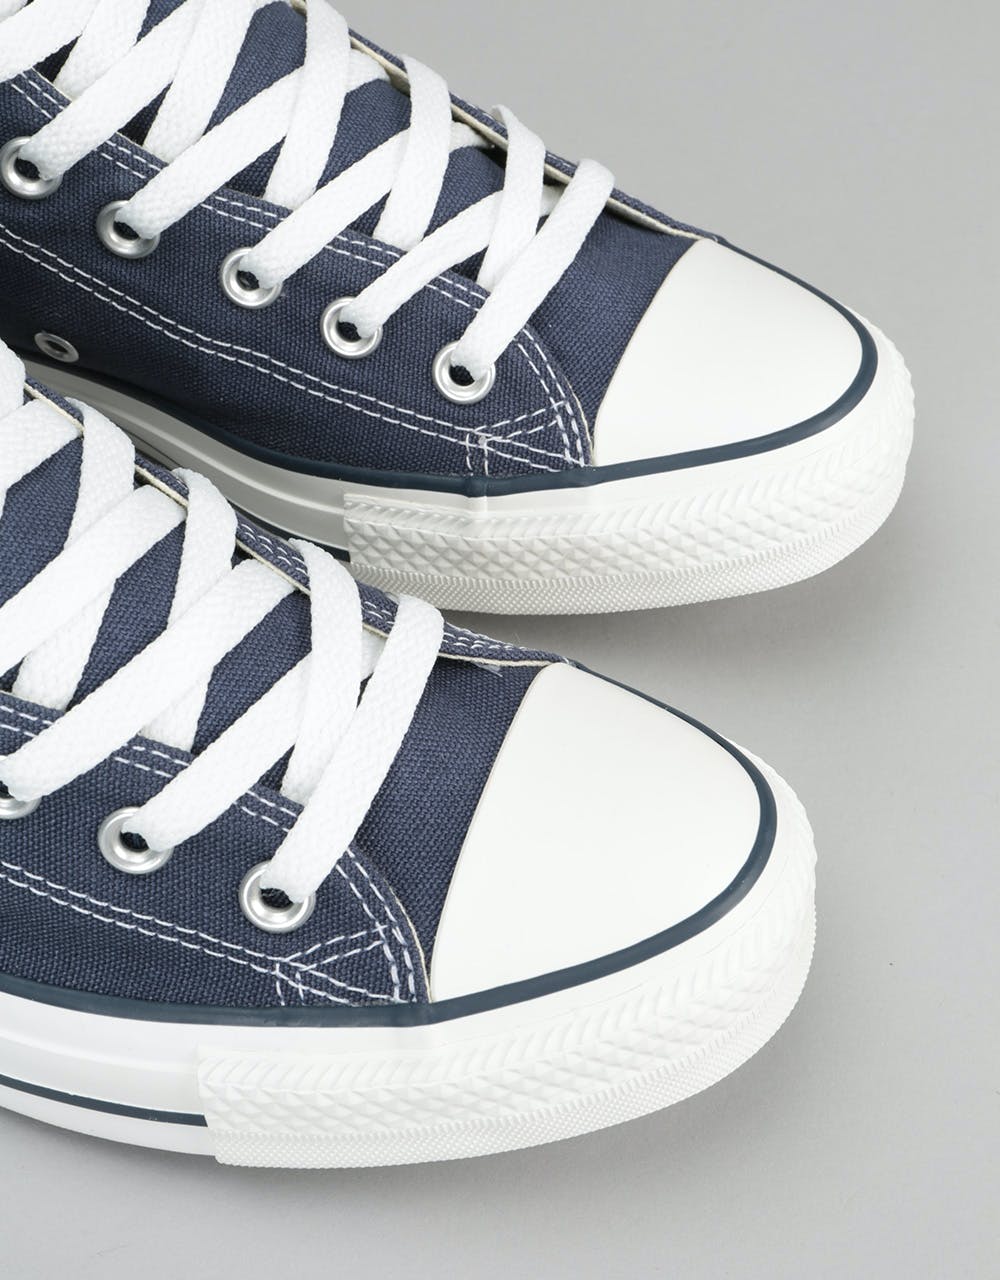 Converse All Star Hi-Top Trainers - Navy